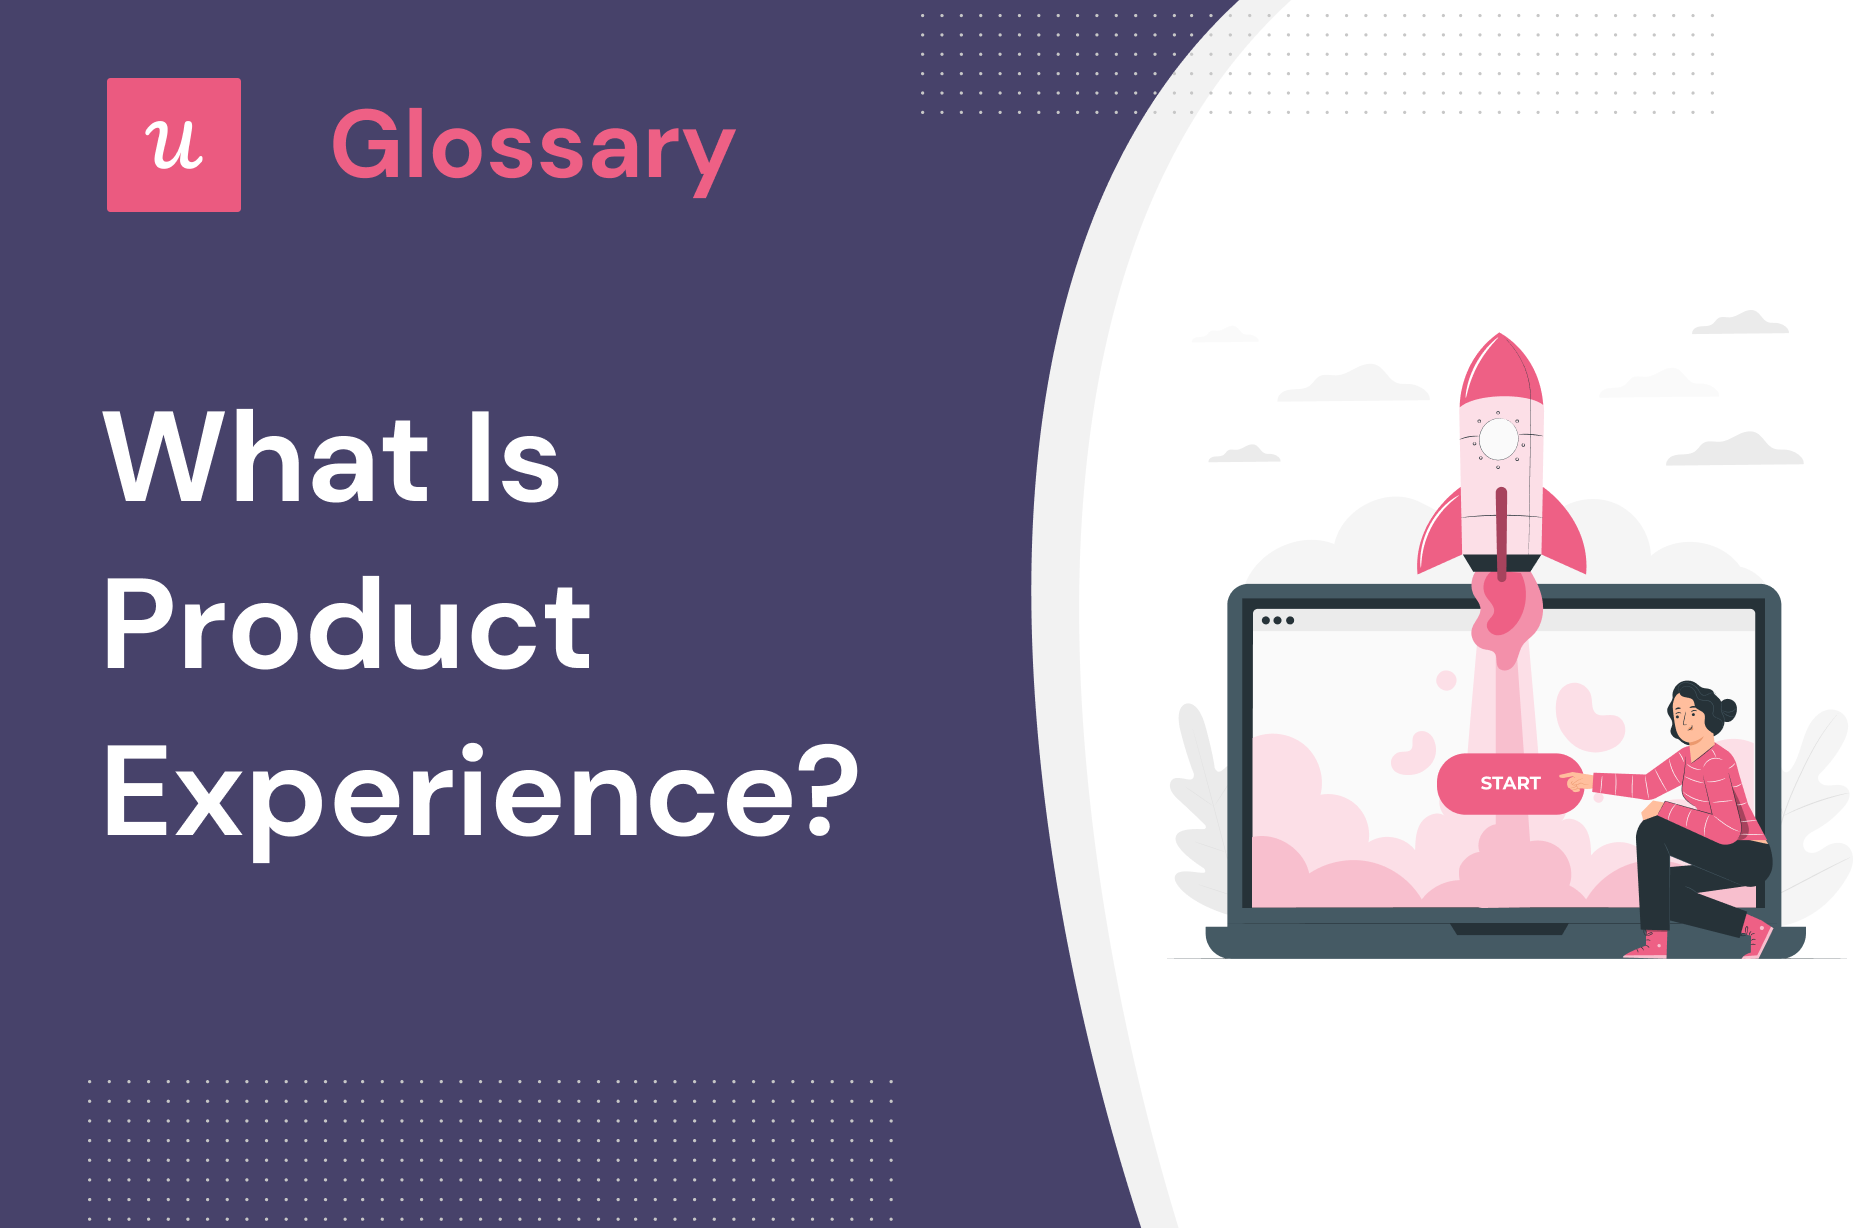 What is Product Experience?